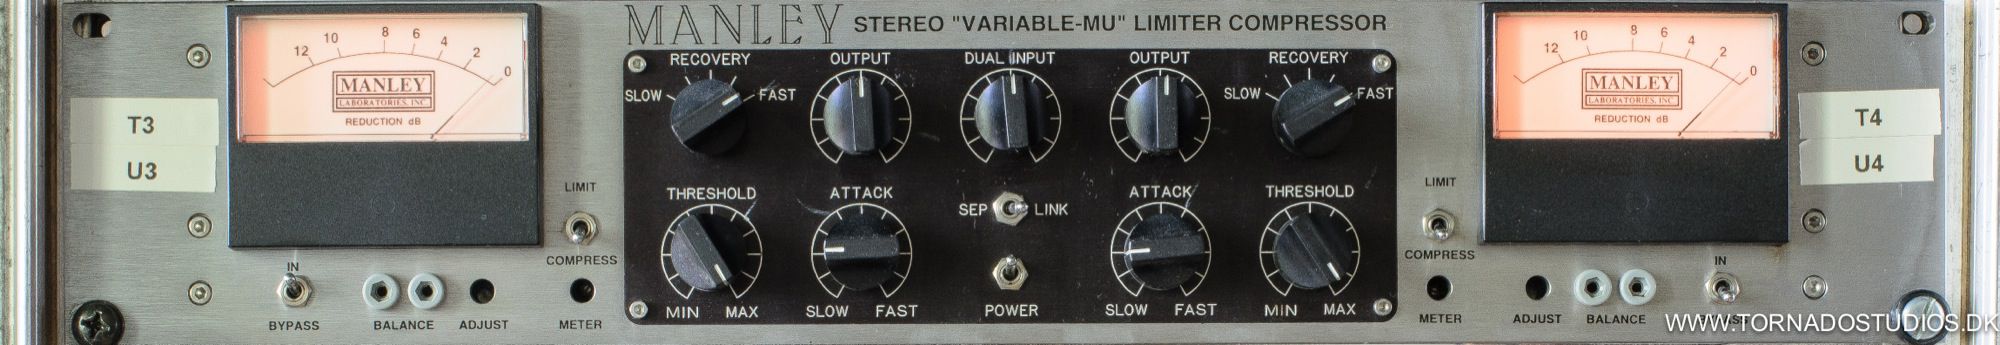 Manley Stereo Variable-MU Limiter Compressor